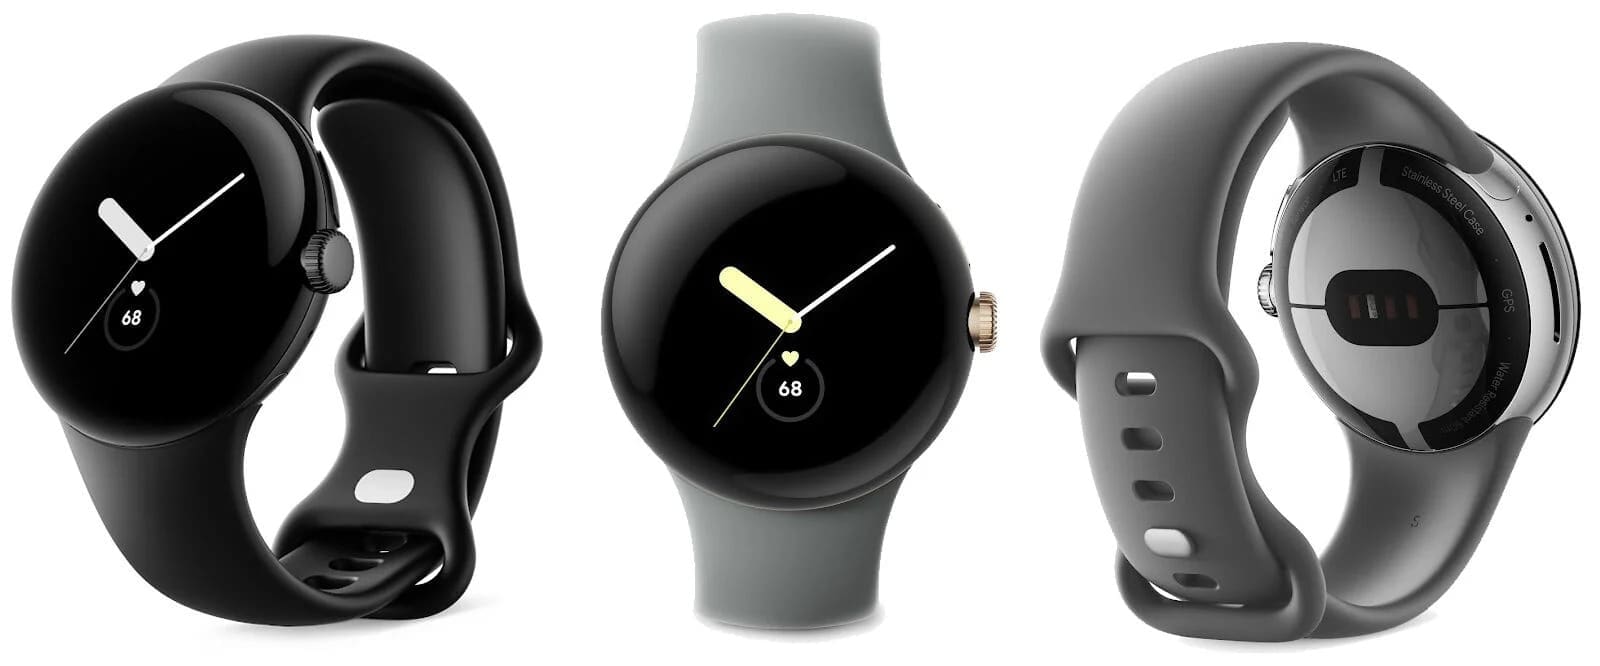 Google will finally go head-to-head with Apple with the Pixel Watch